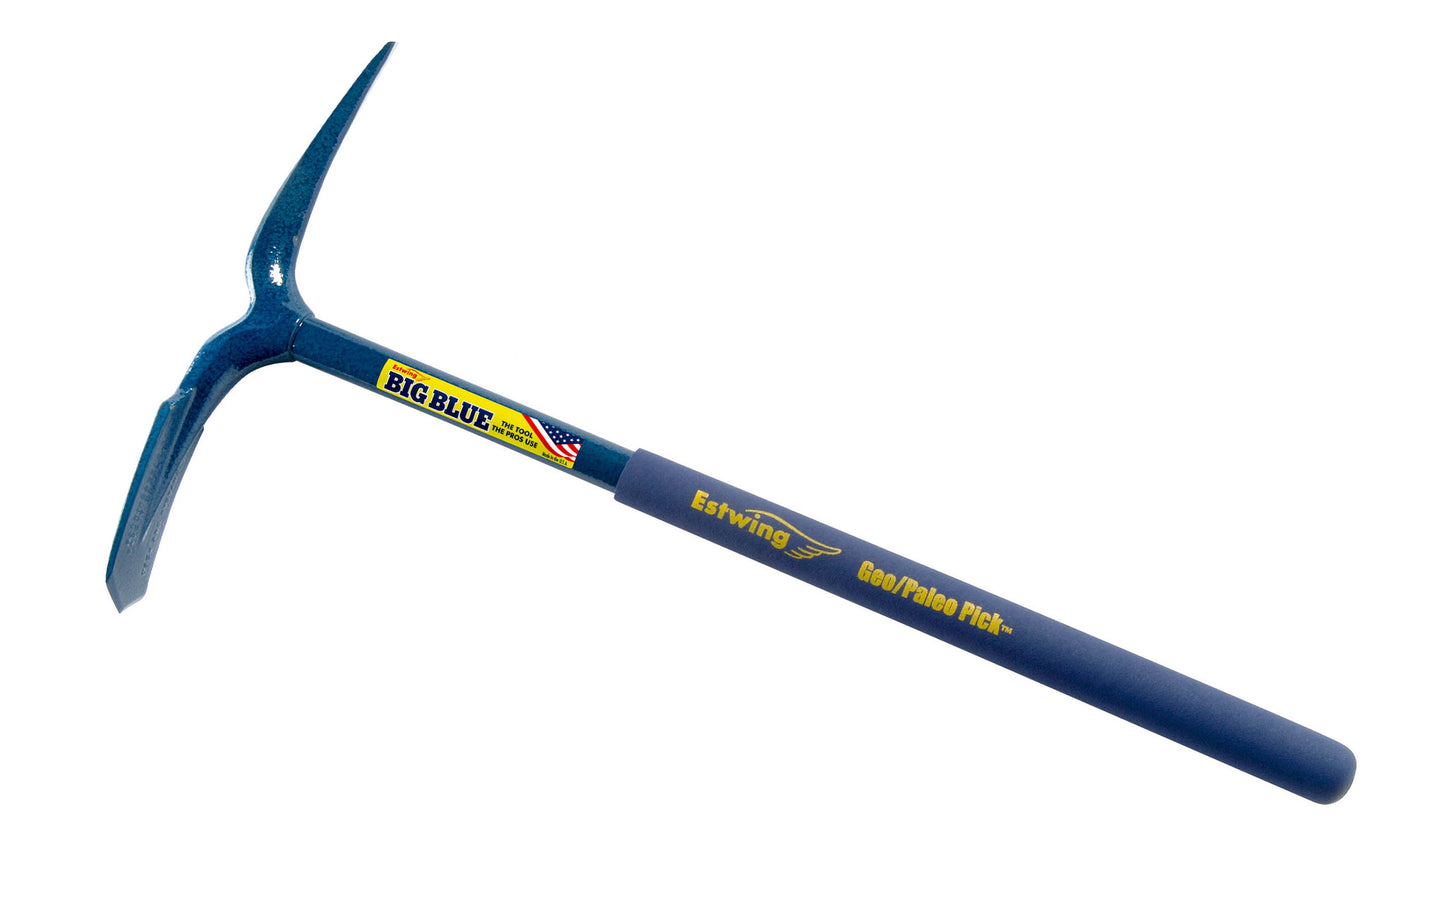 The Estwing Geo/Paleo Pick with Nylon Grip is an all one-forged tempered steel piece from the head through the handle. 26" Overall Length. Model GP-100. Made in USA ~ 034139764913